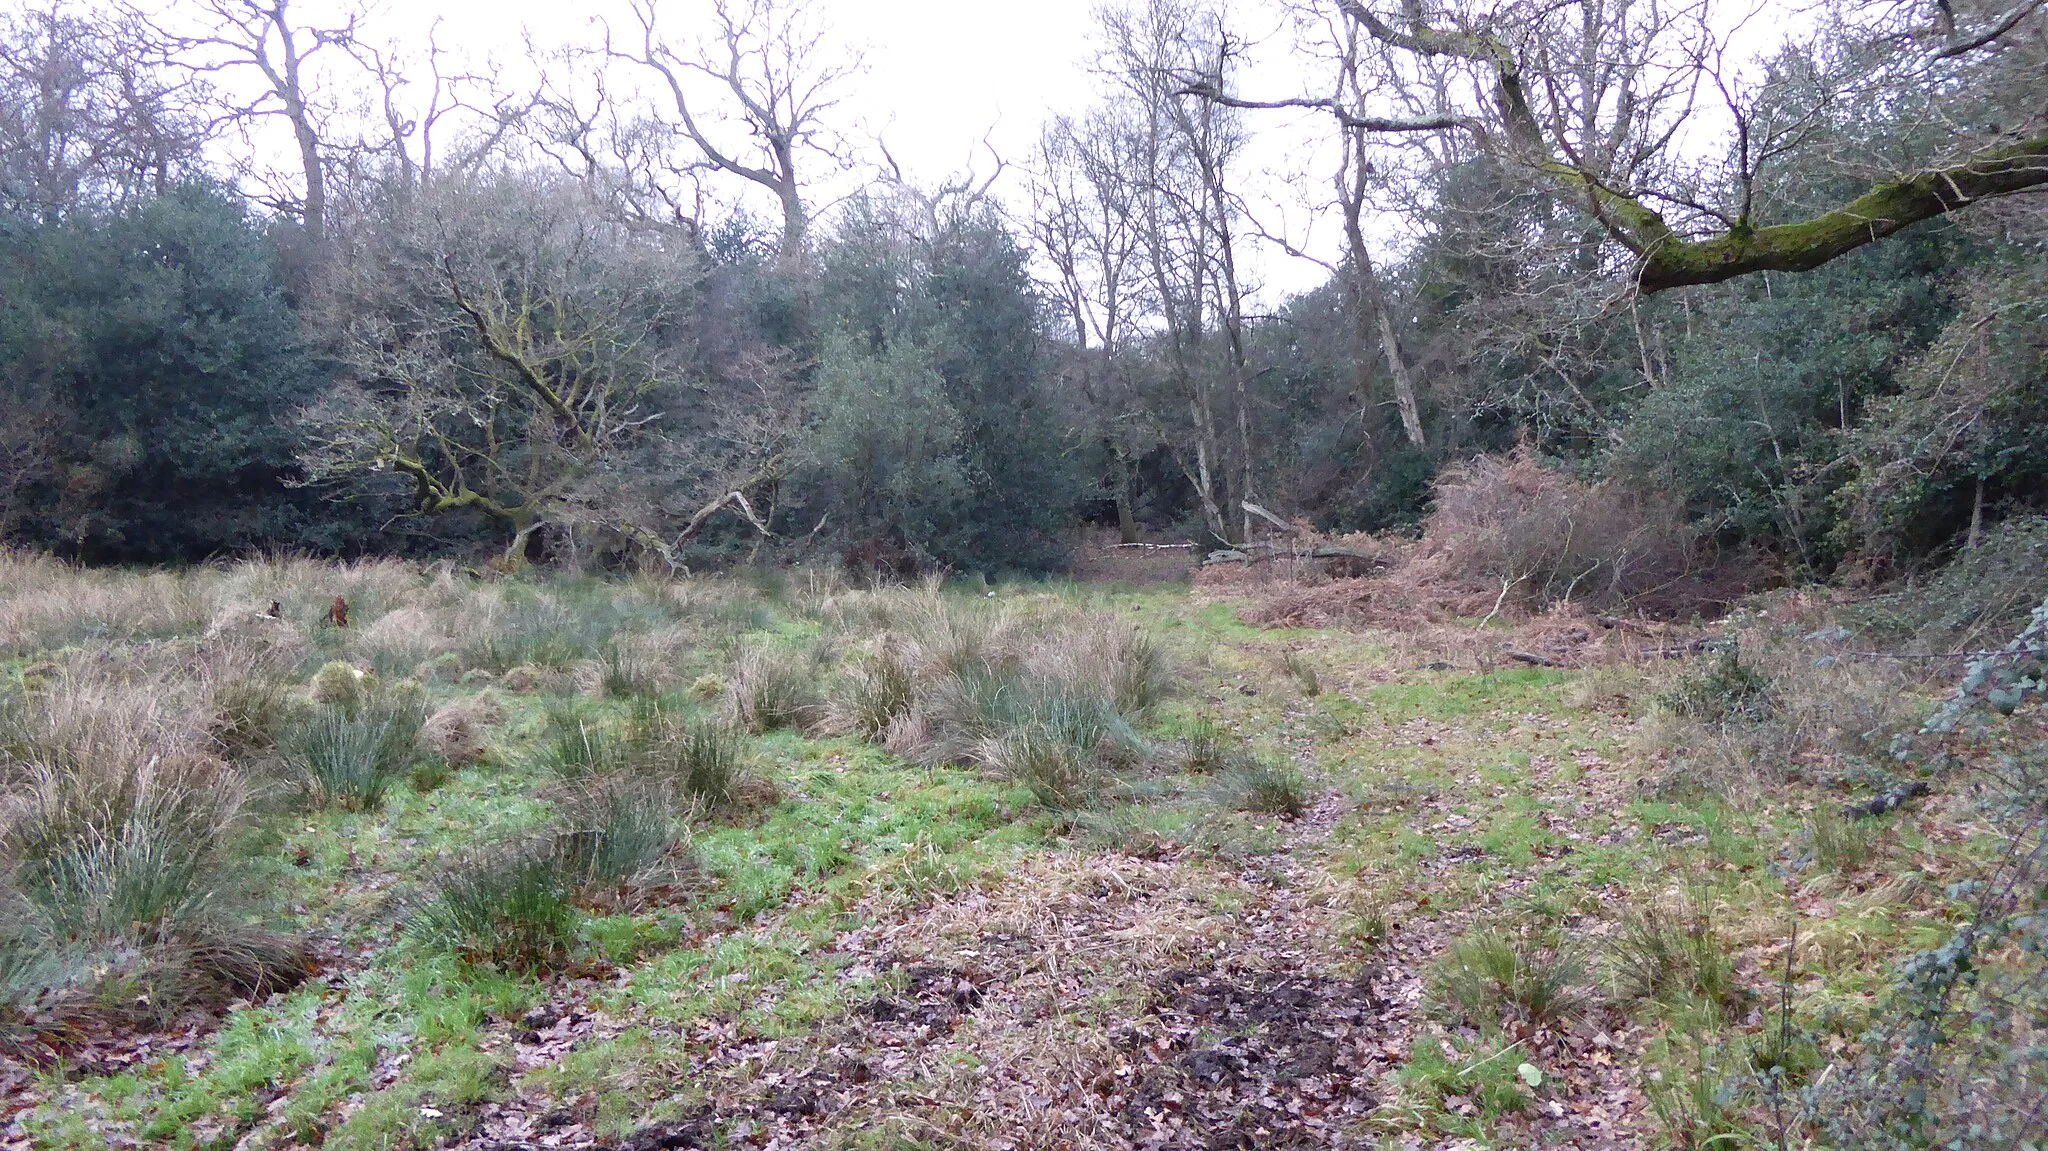 Photo showing: Charleshill SSSI is a Site of Special Scientific Interest west of Elstead in Surrey. It is part of Thundry Meadows nature reserve, which is managed by the Surrey Wildlife Trust.